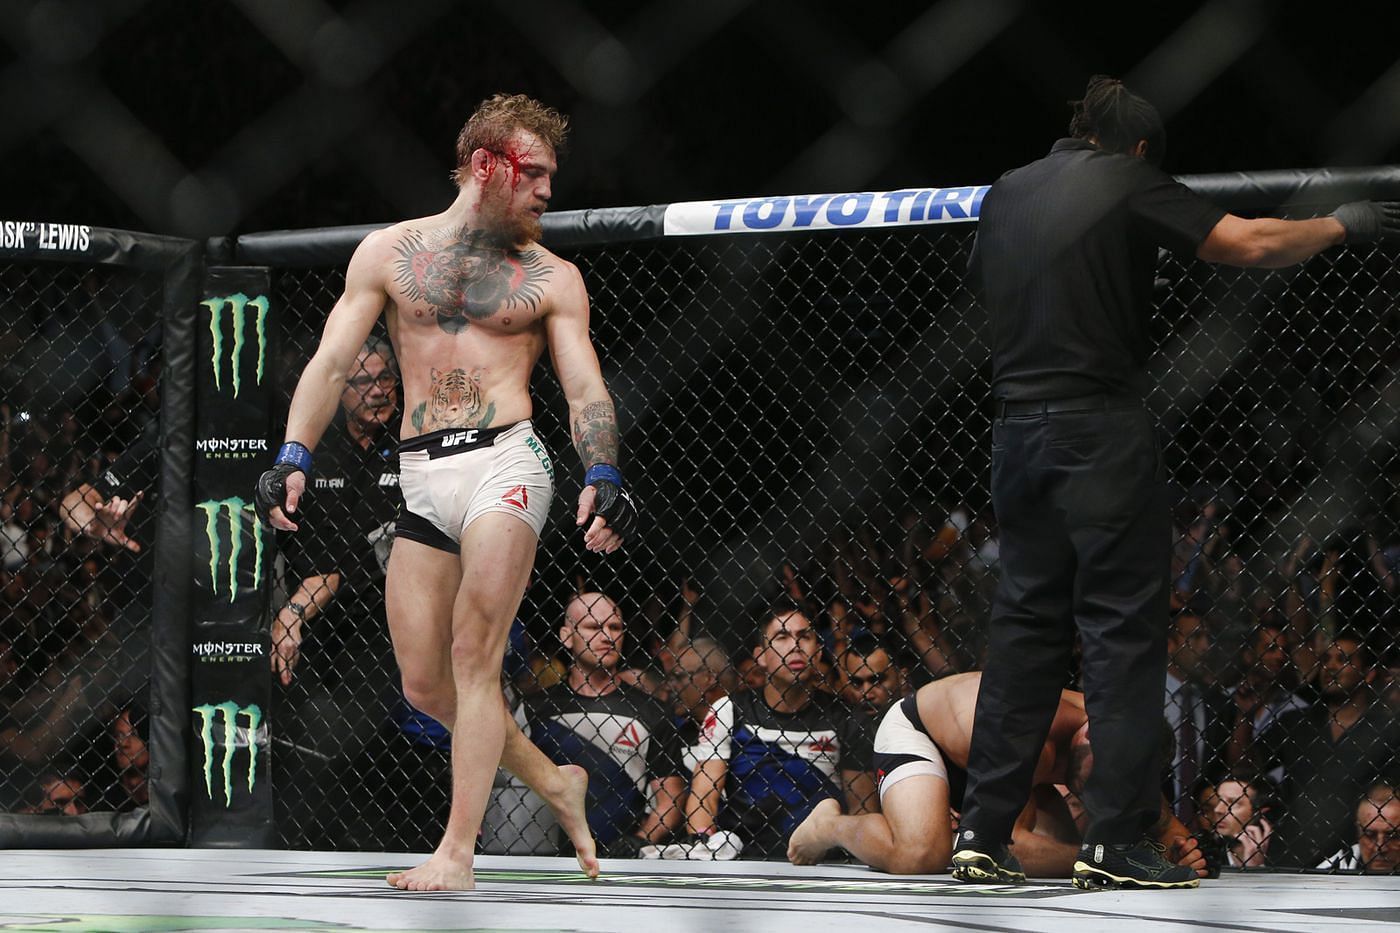 Conor McGregor&#039;s star power grew substantially after his win over Chad Mendes in 2015